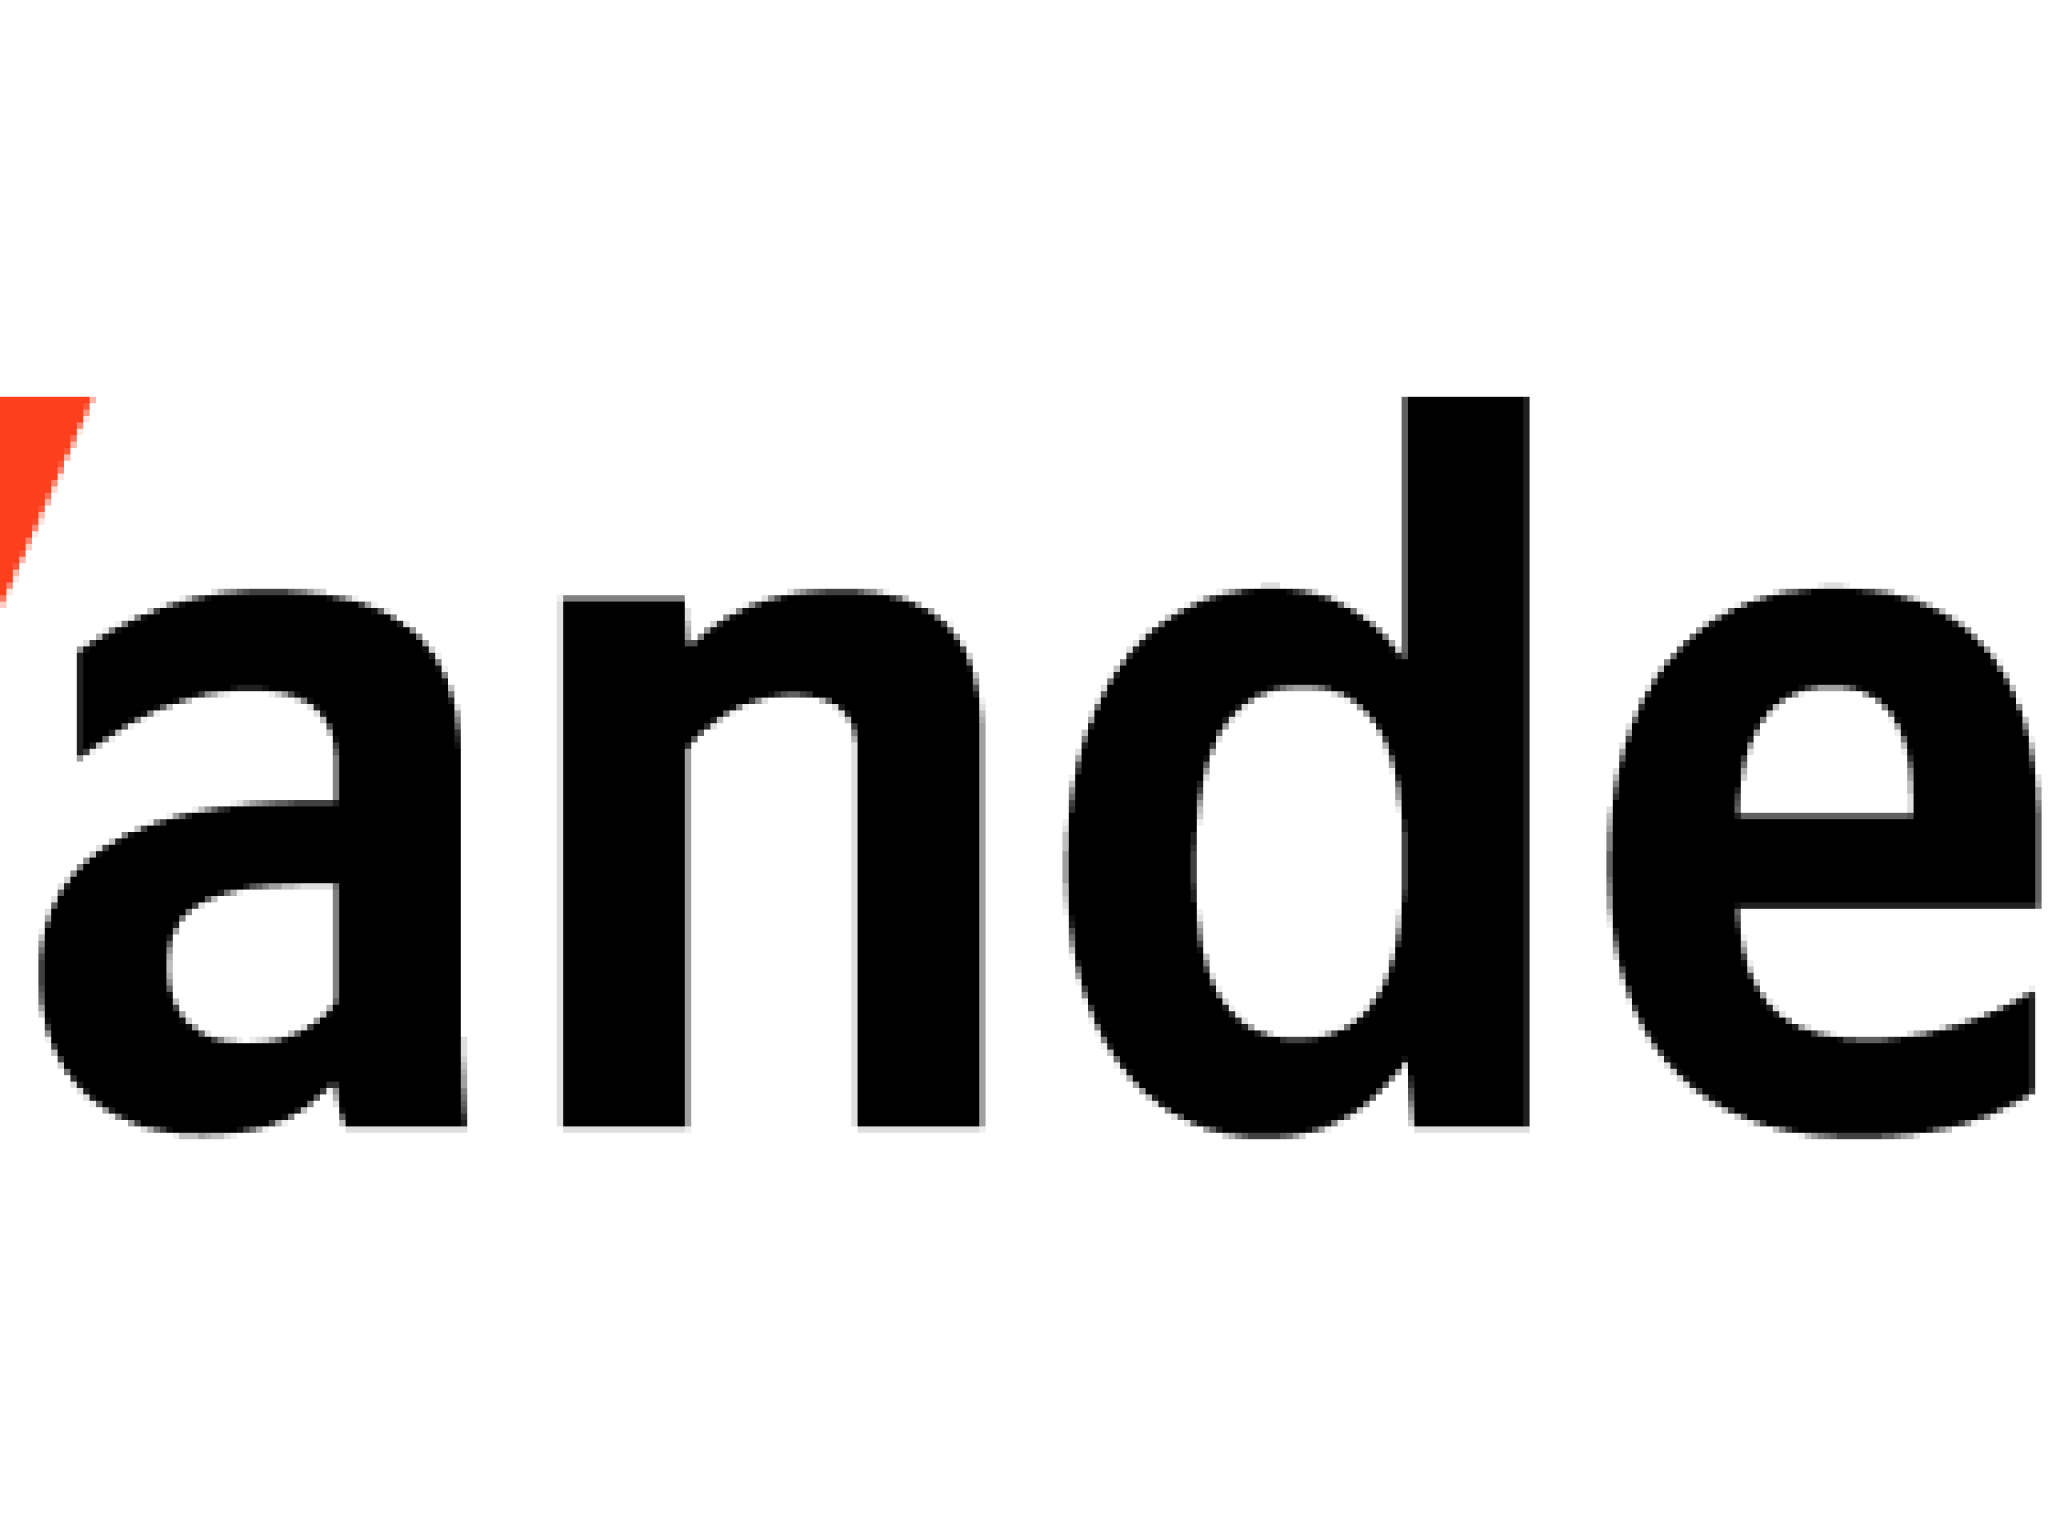  yandex-seeks-putins-approval-for-business-restructuring-report 